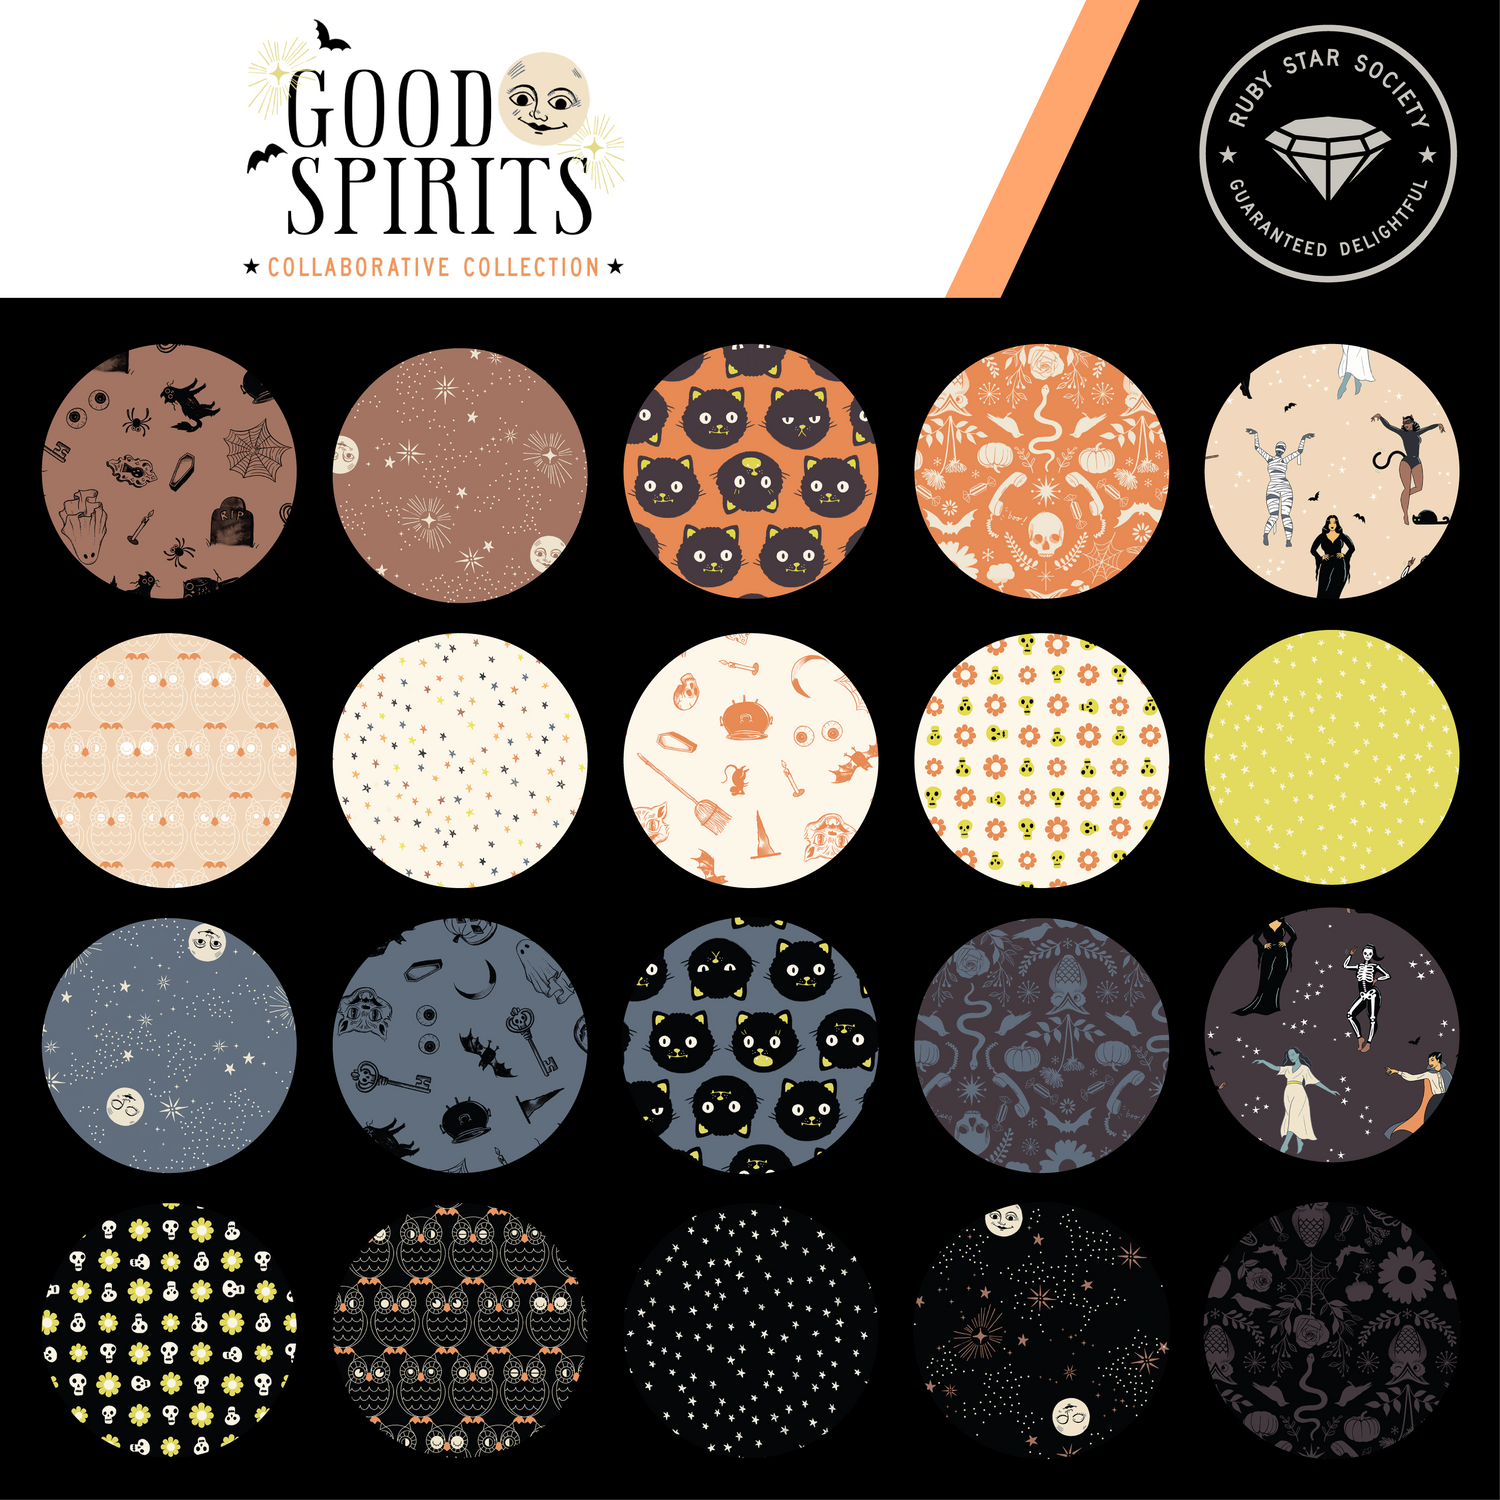 Good Spirits Collaborative Collection by Ruby Star Society